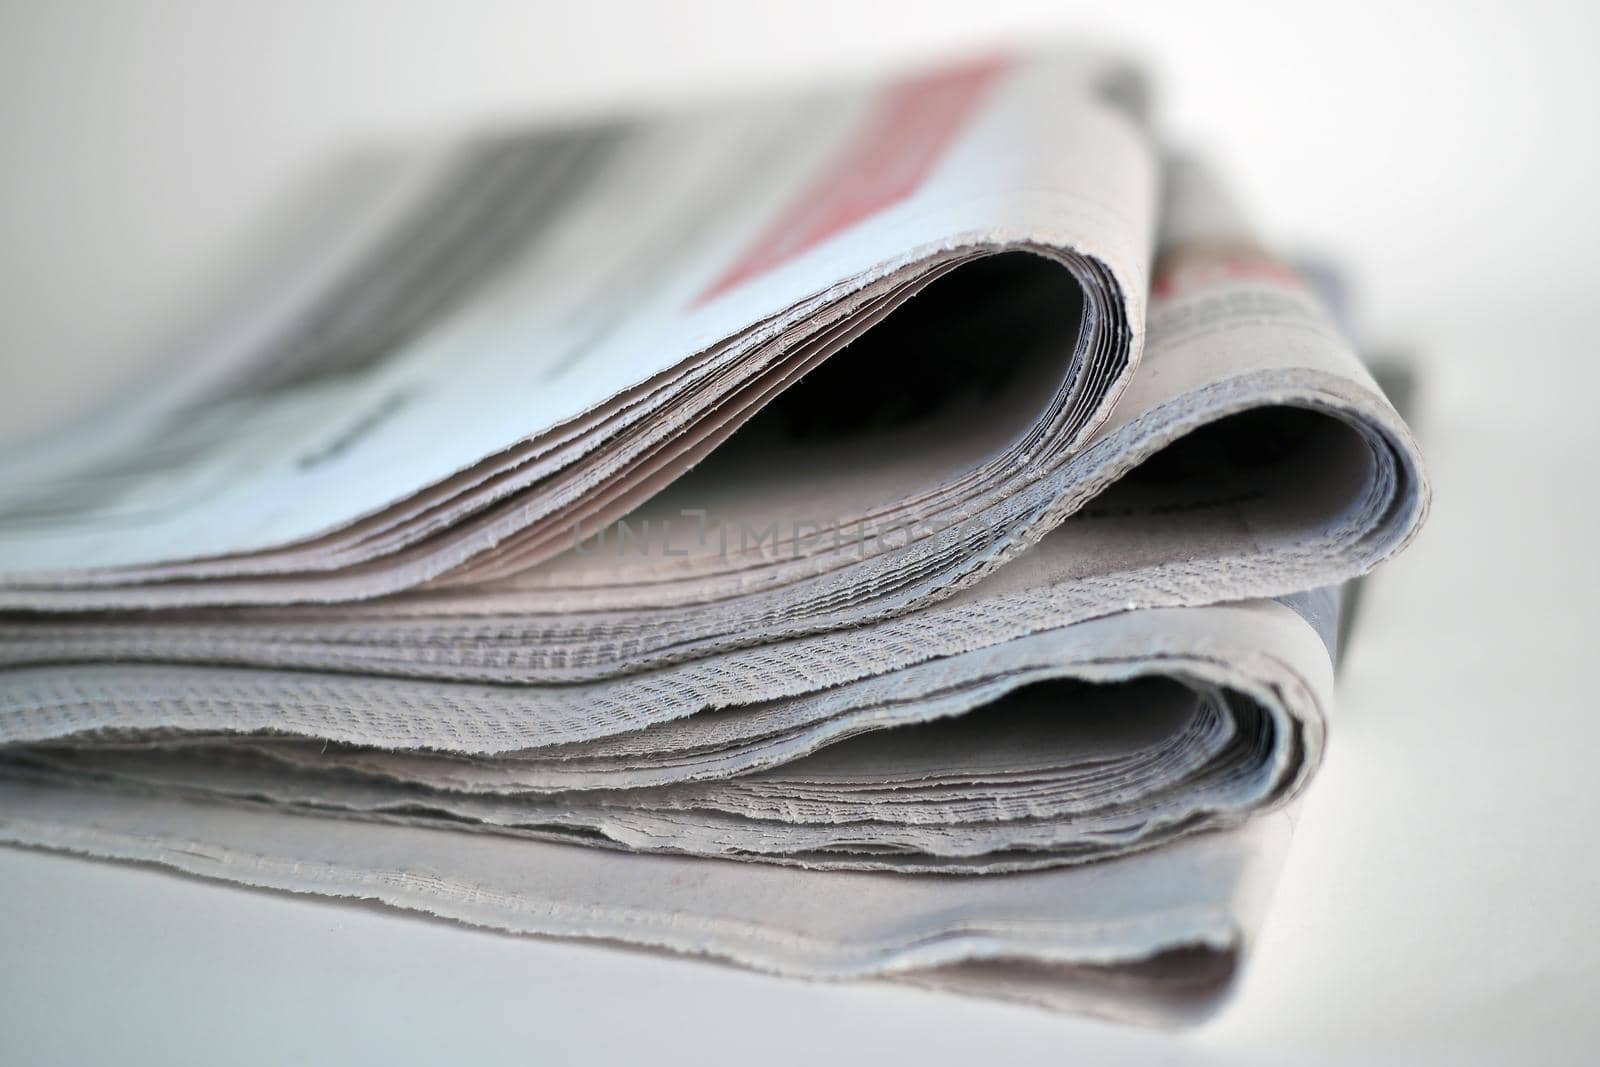 Stack of newspapers on white background